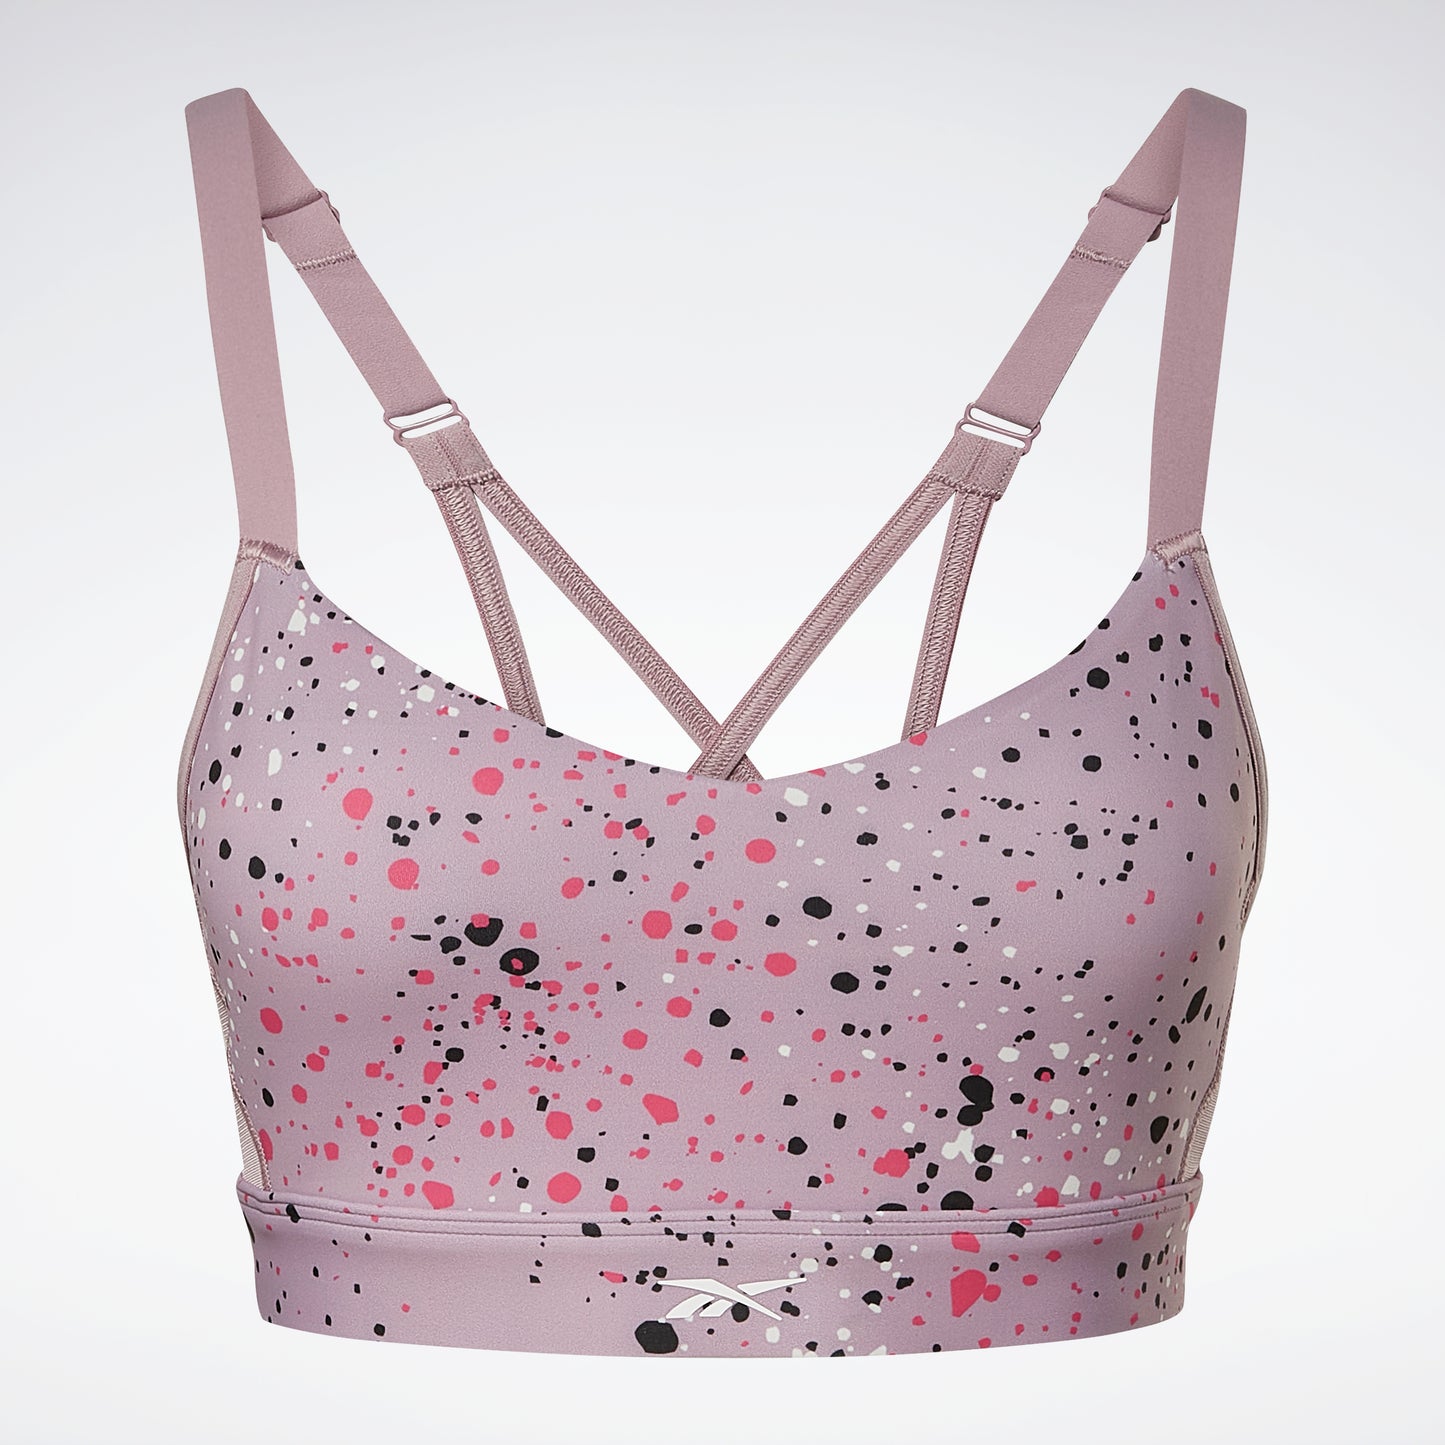 Introducing our Lux matching set: Lux Sarah Mesh Sports Bra & Lux